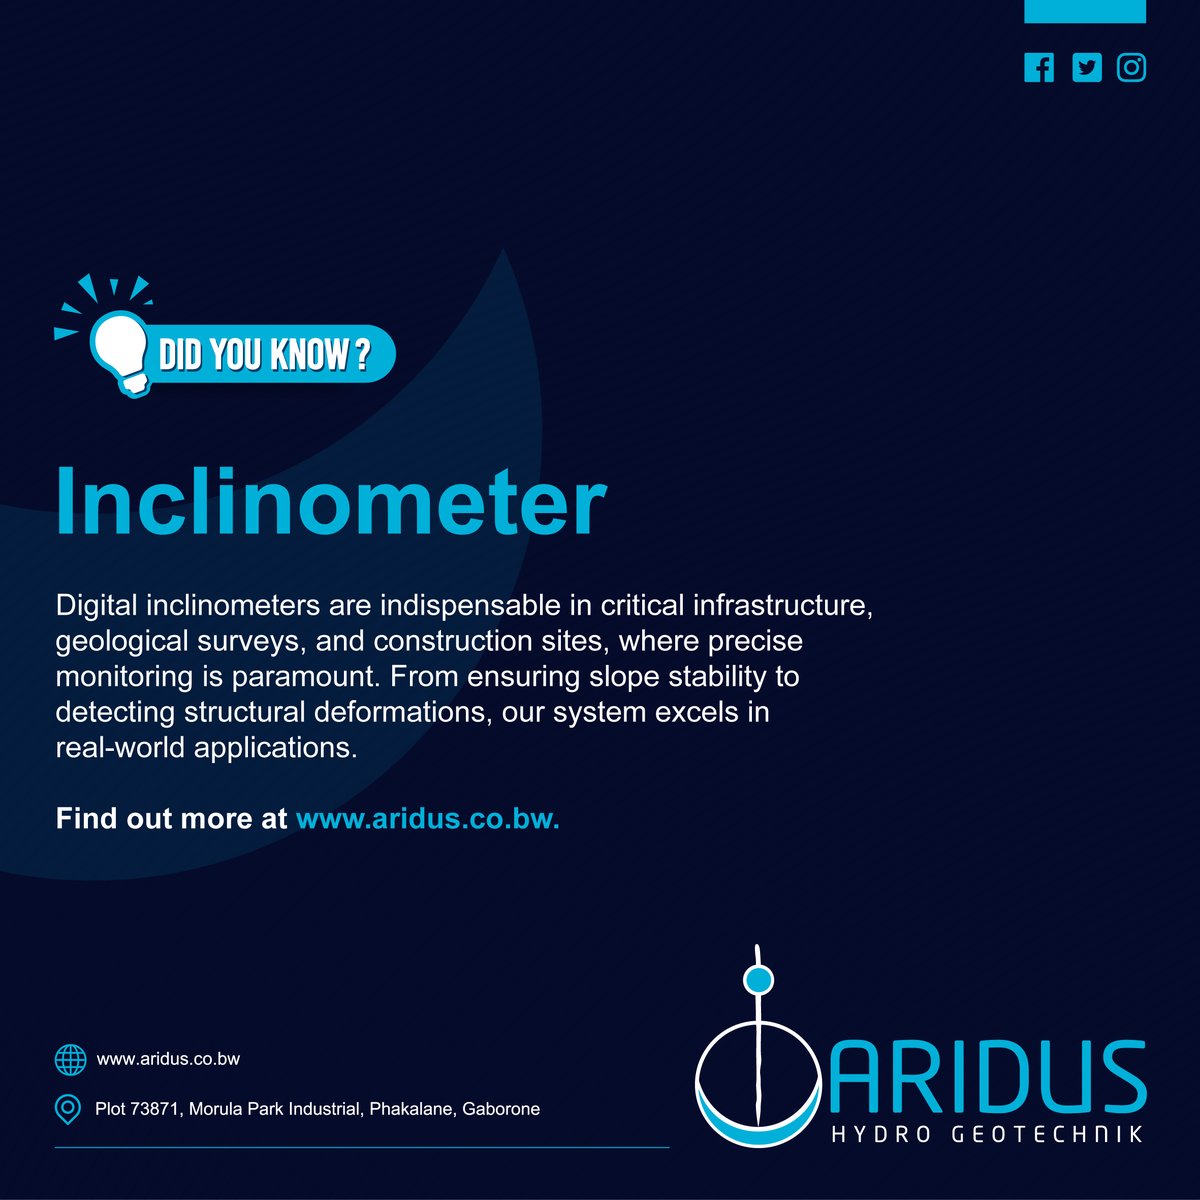 Precision in every angle, explore our digital inclinometers for reliable monitoring.
Find out more at aridus.co.bw.
#DigitalInclinometers #GeologicalSurvey #PrecisionMonitoring